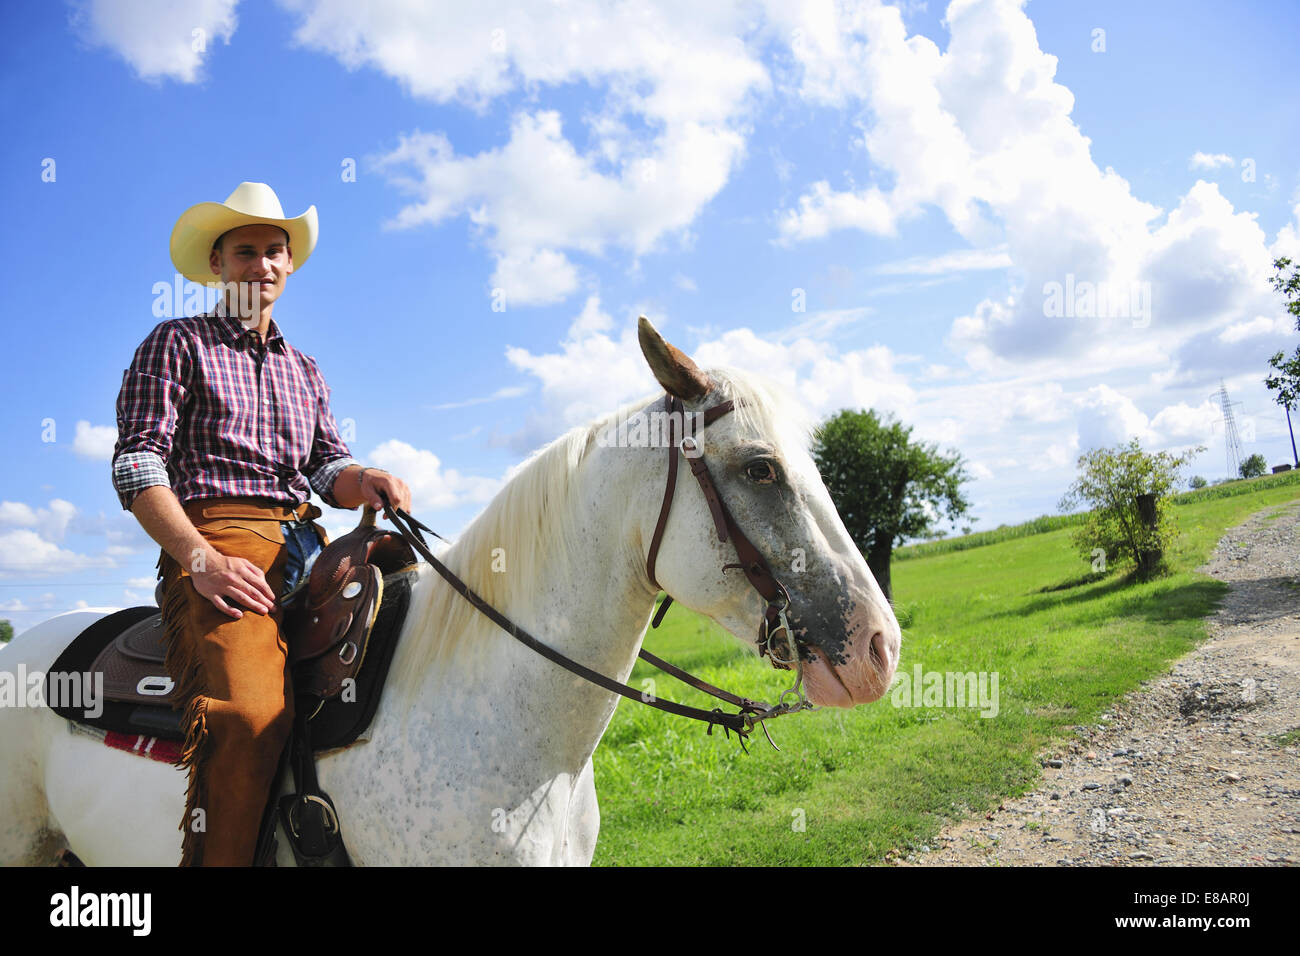 Portrait of young man in cowboy gear on horse on rural road Stock Photo